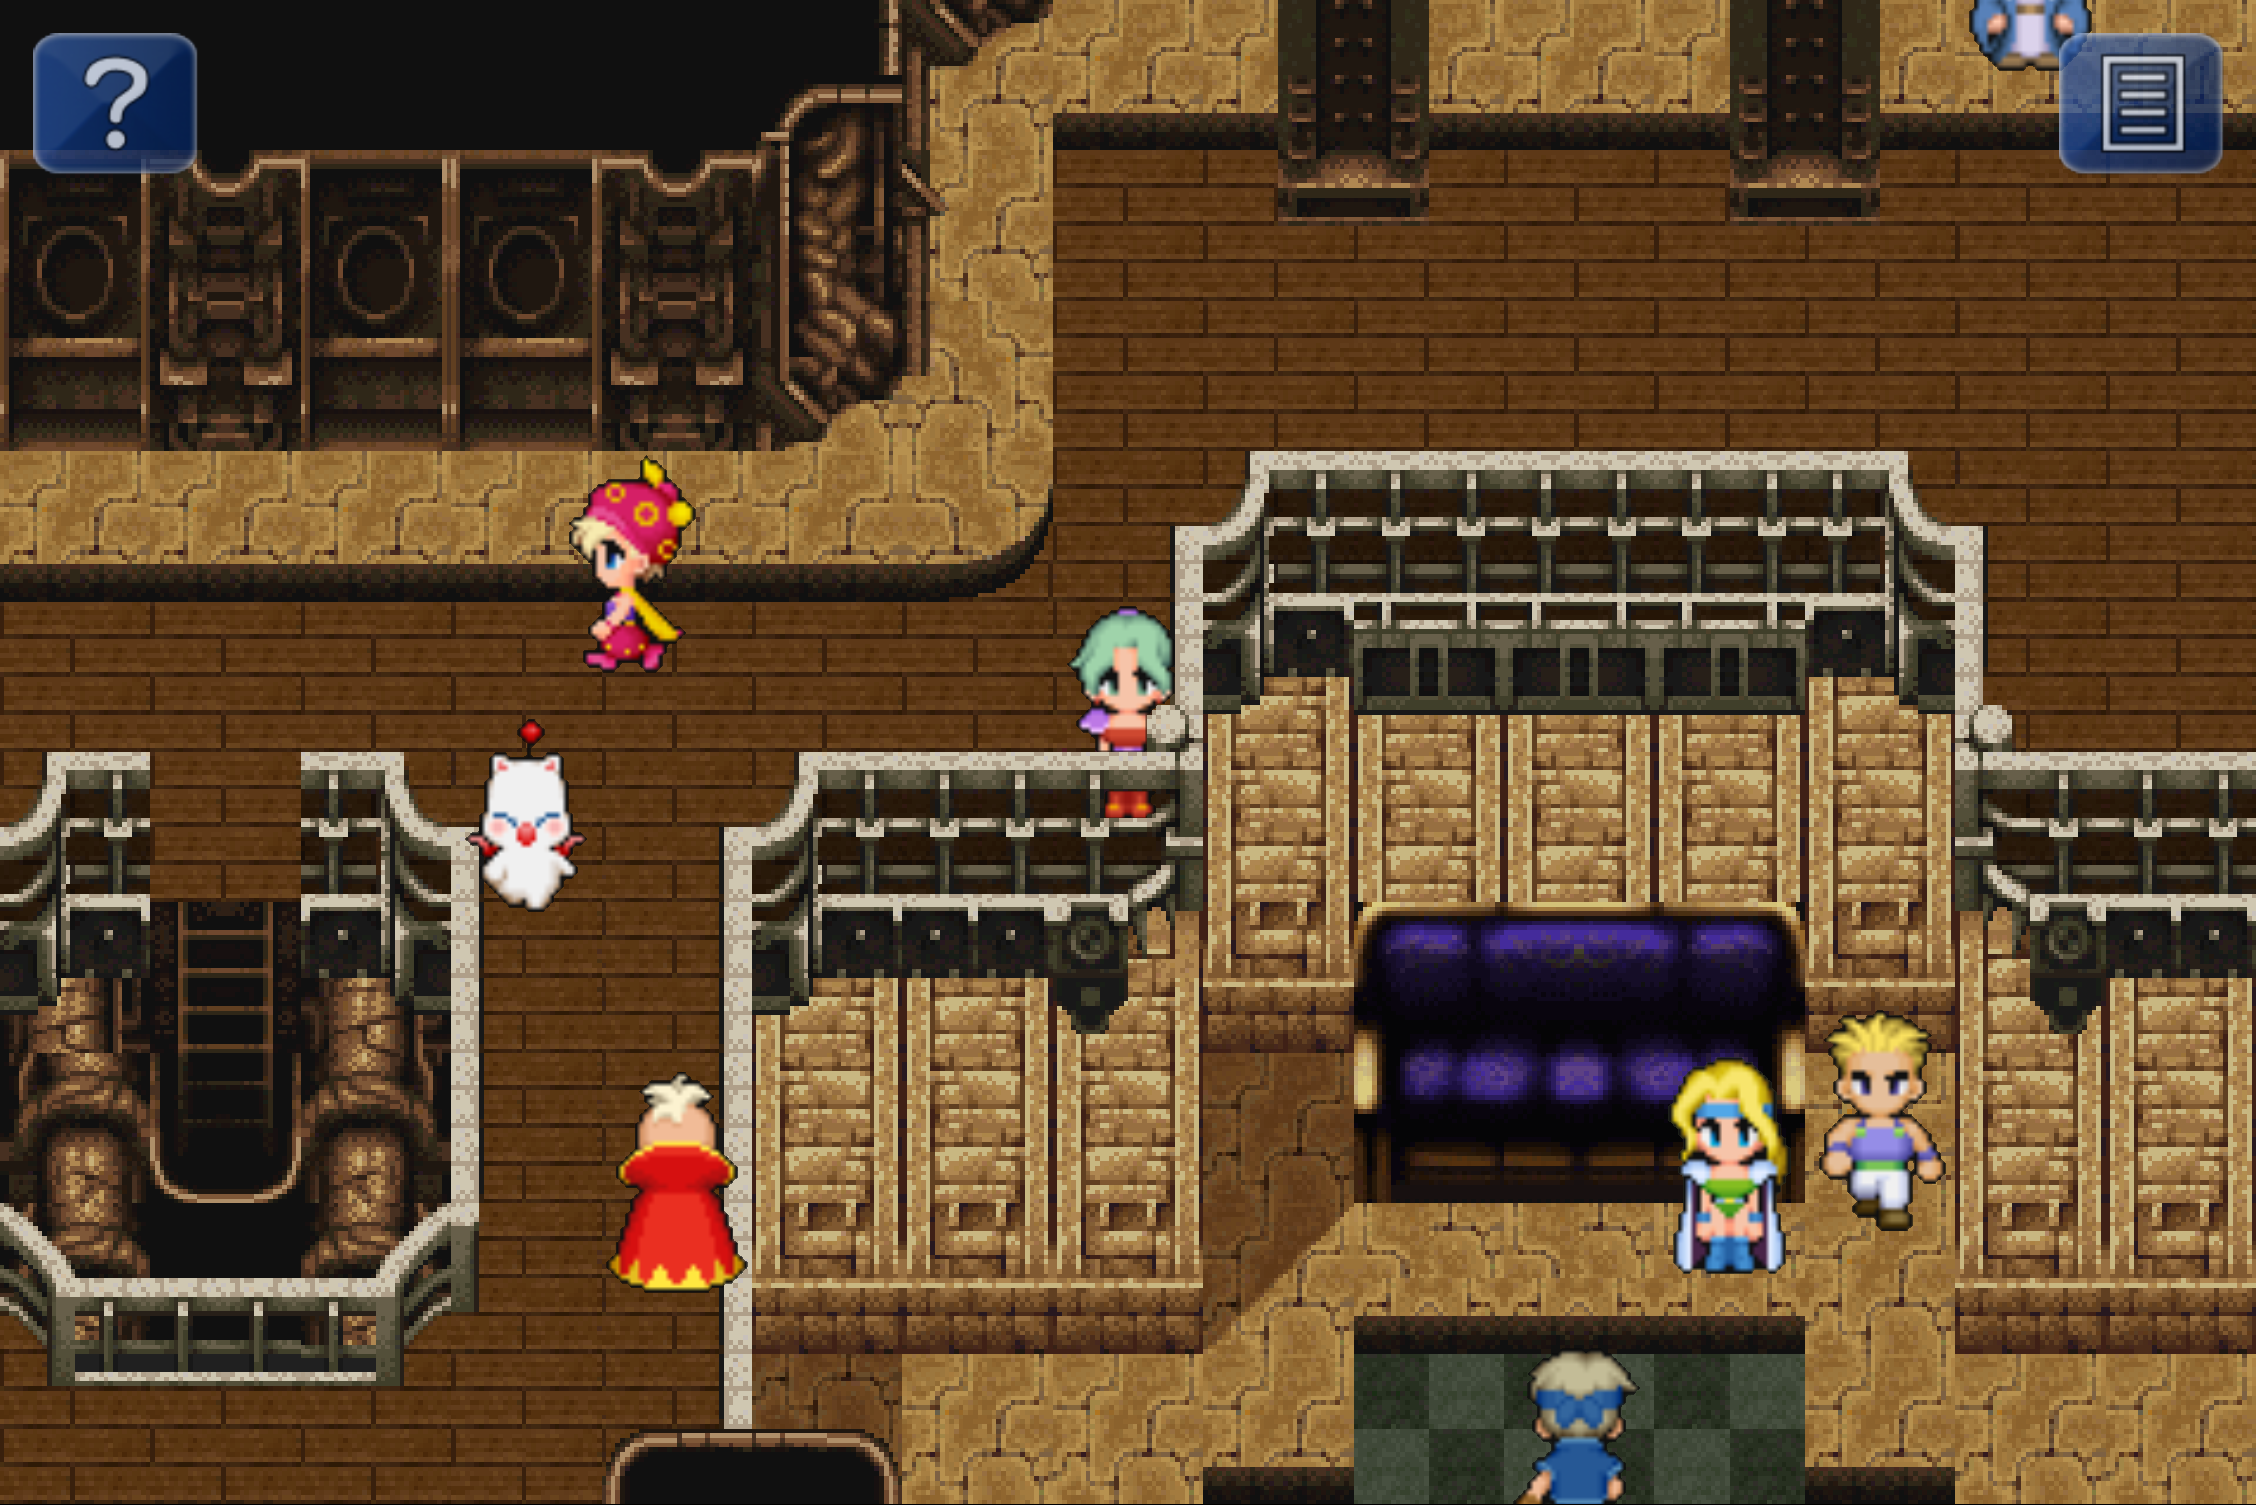 How Can I Play It?: Final Fantasy VI